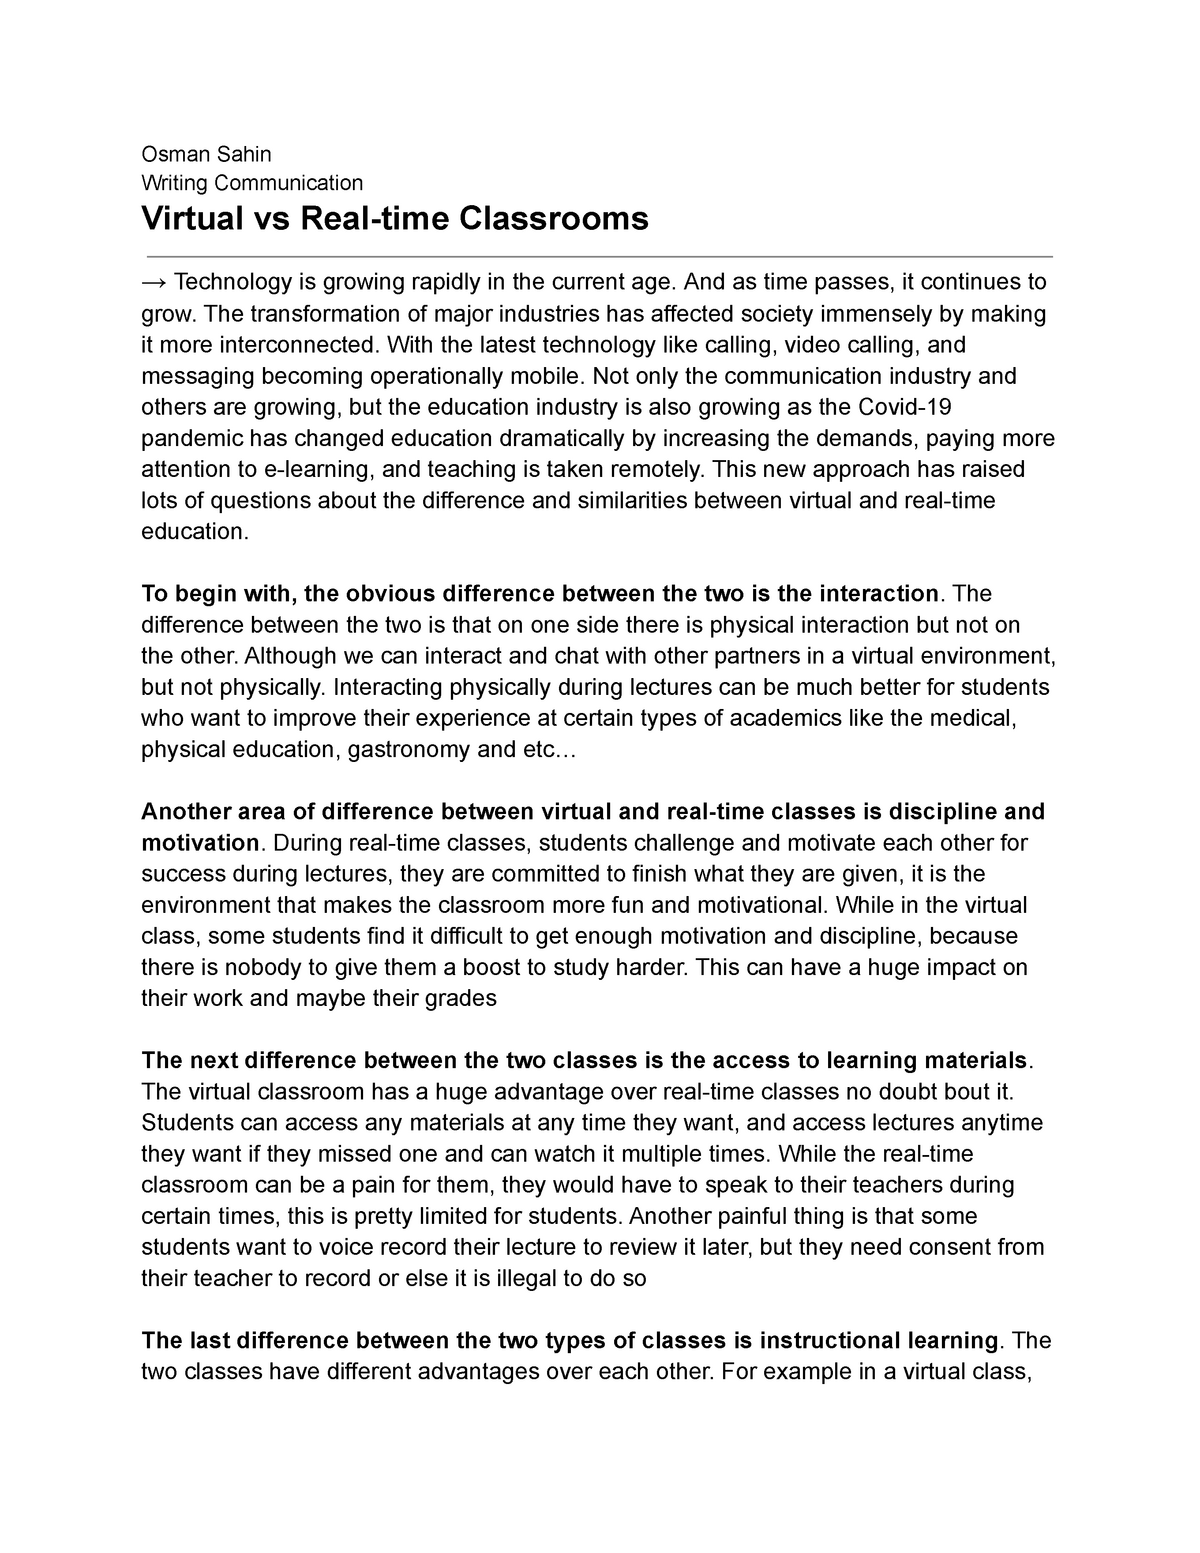 compare and contrast essay virtual vs real classrooms